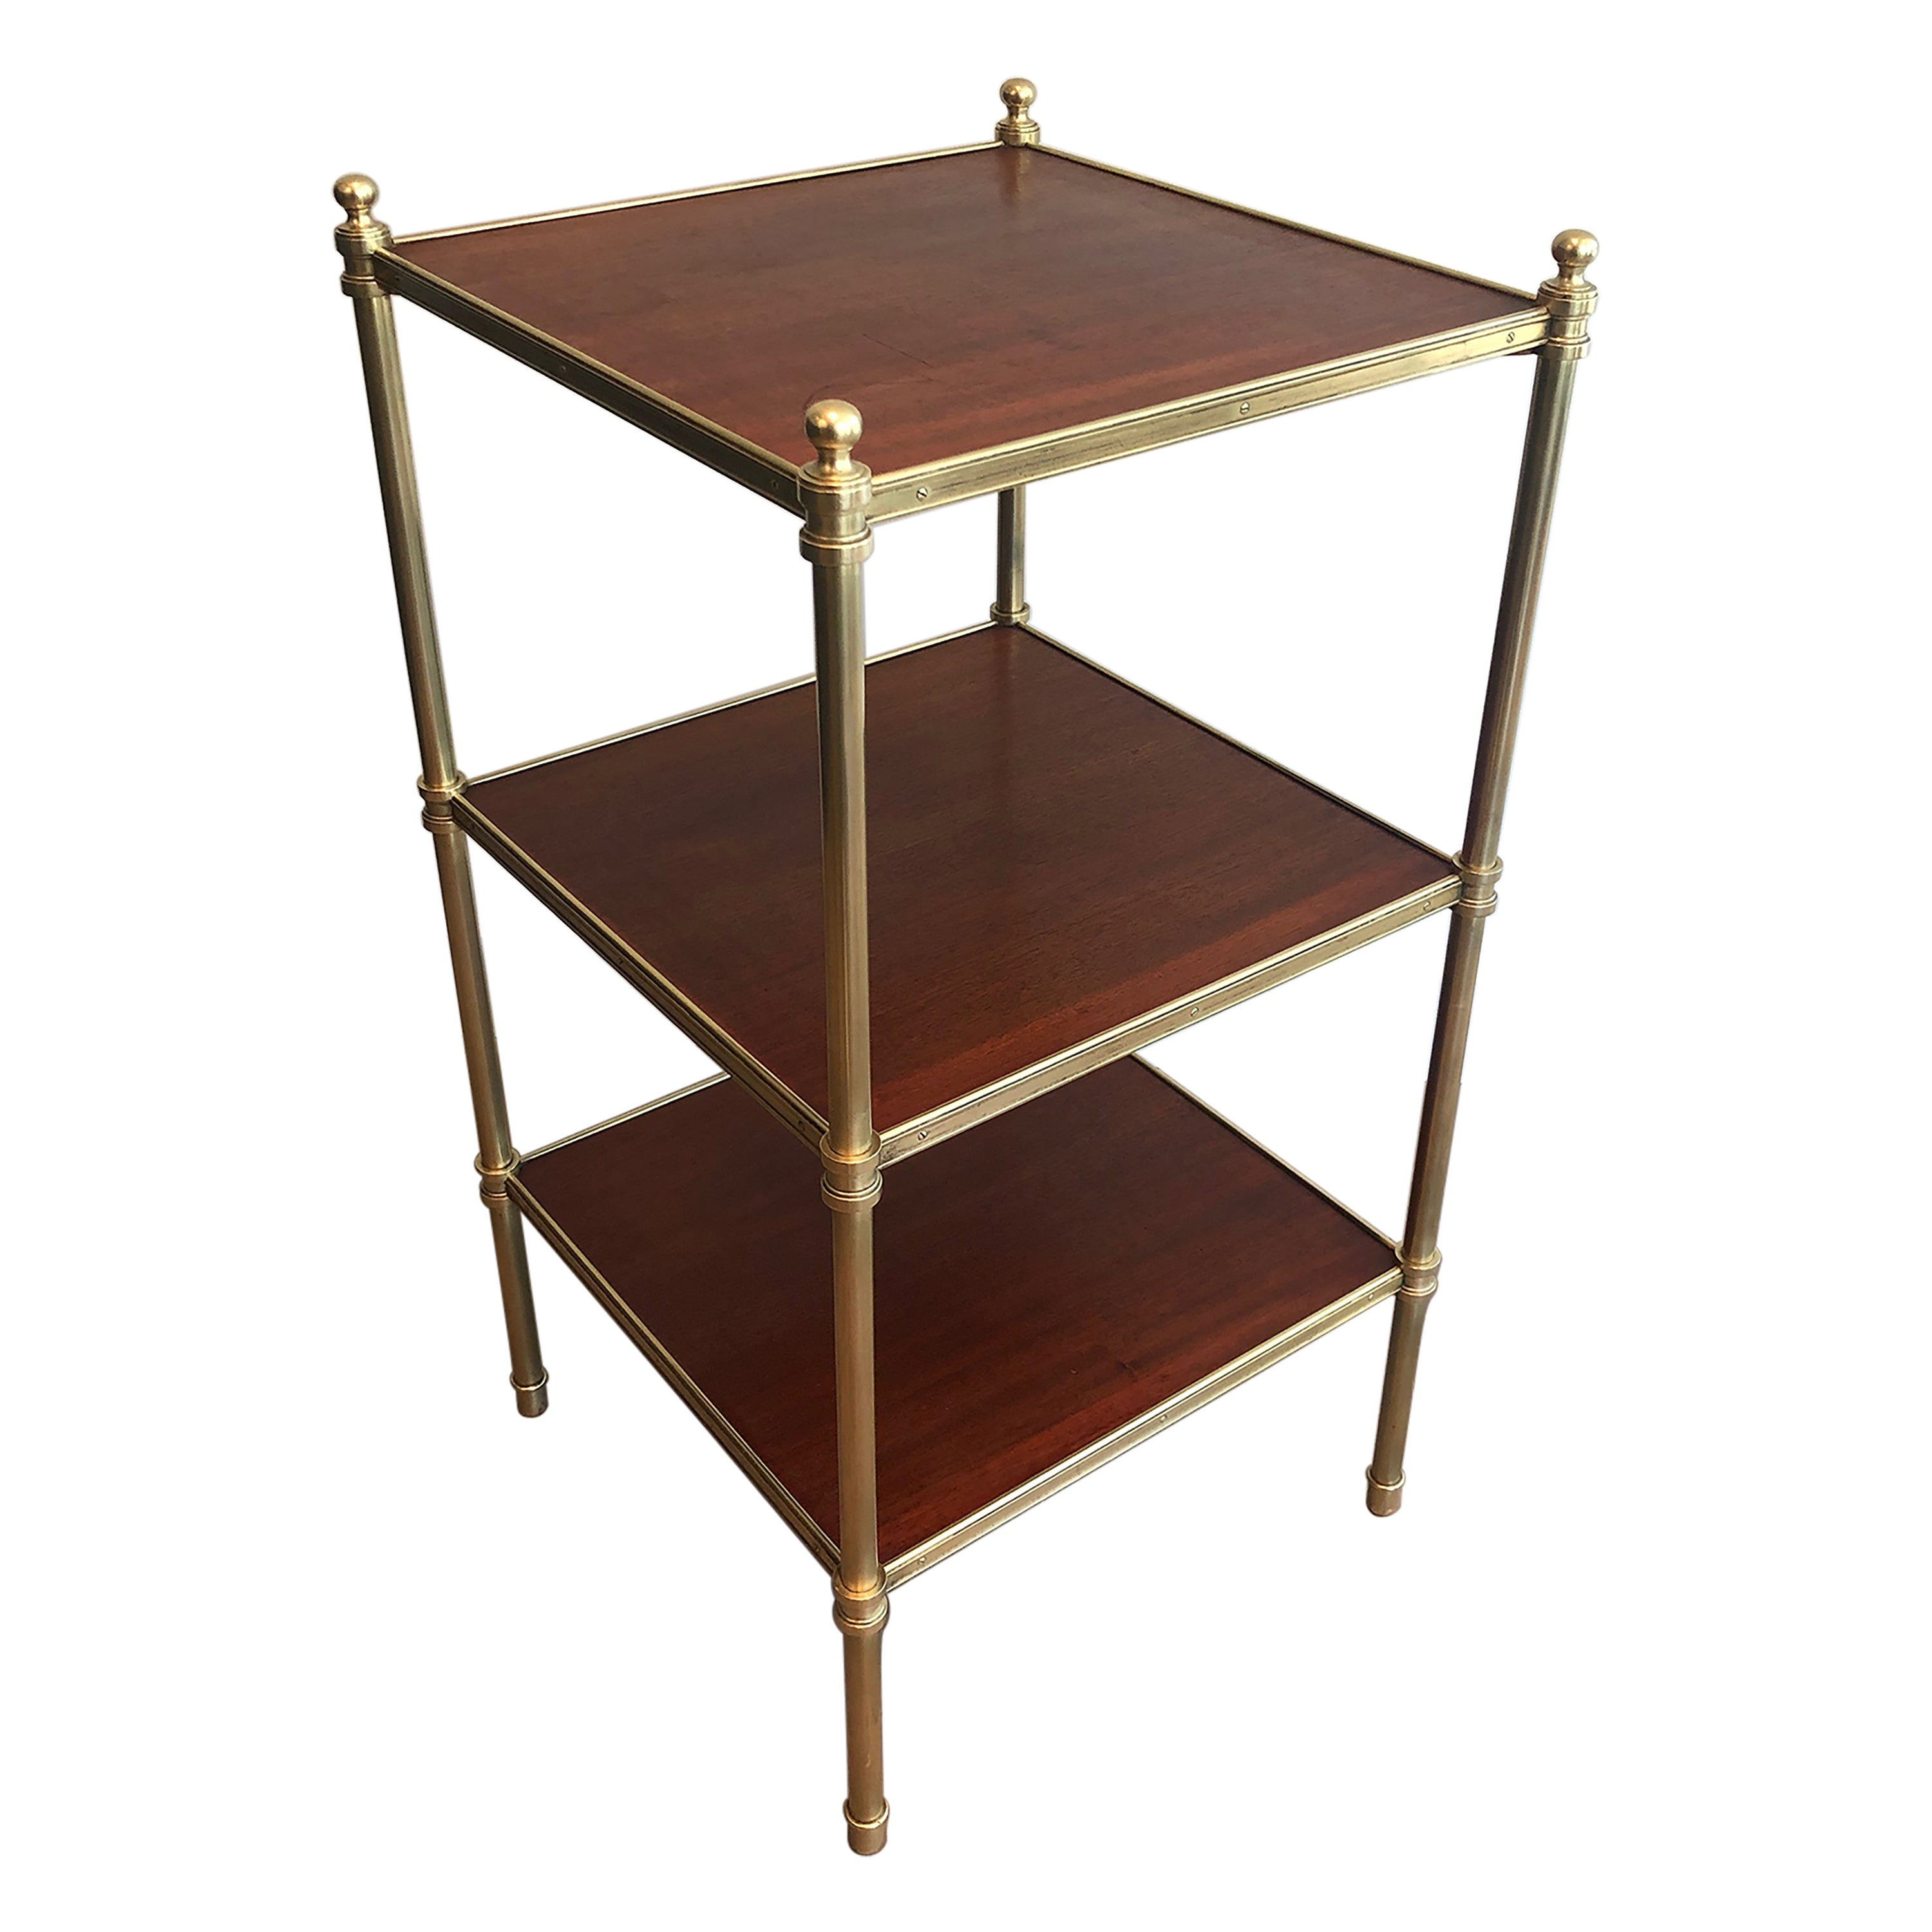 Three Tiers Mahogany and Brass Side Table by Maison Jansen